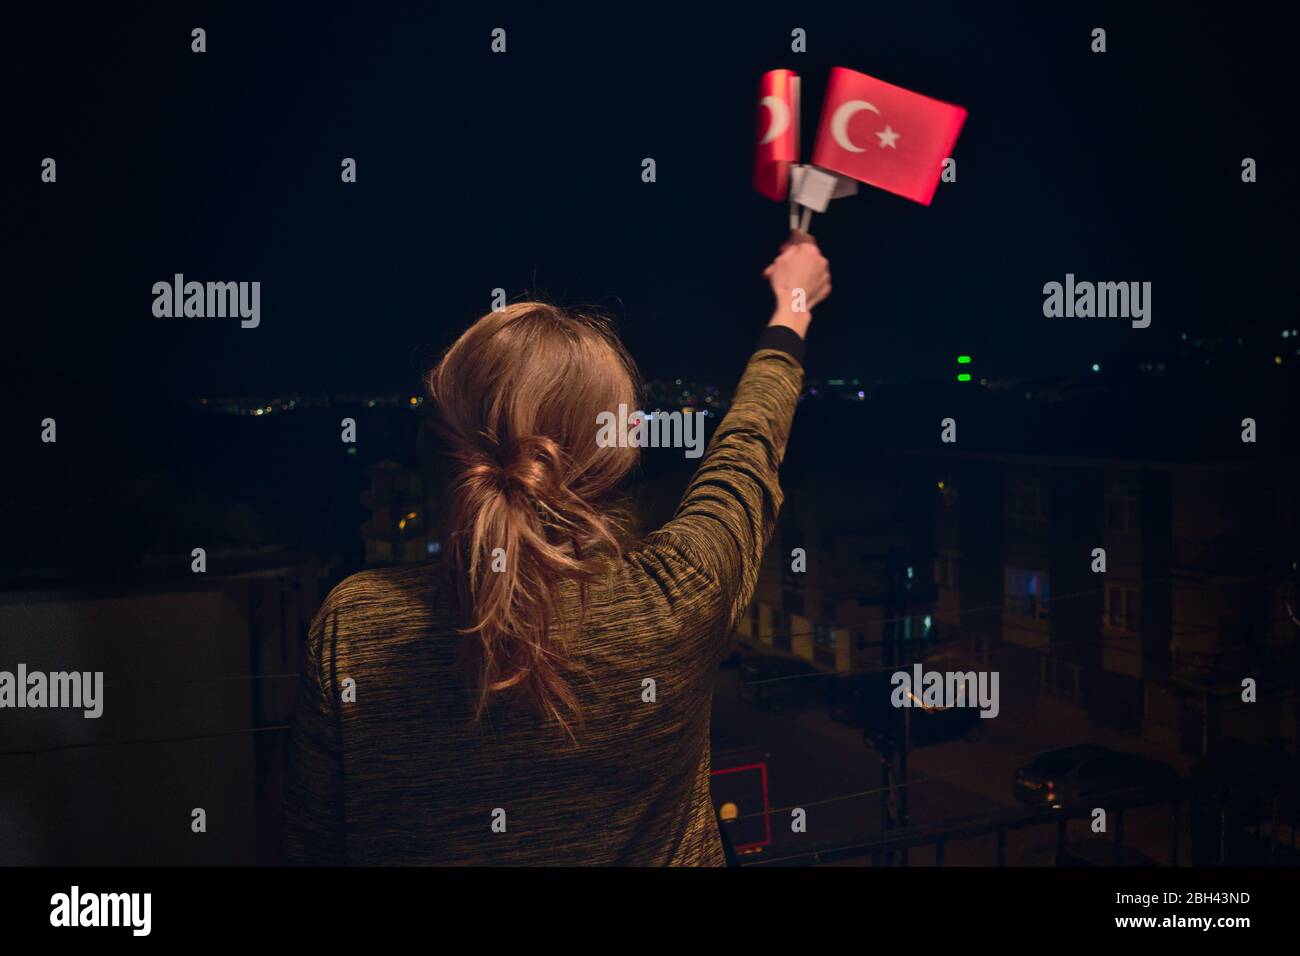 Turkish Woman Holding, Turkish Flags at night Celebrating April 23 National Sovereignty Children's Day Stock Photo